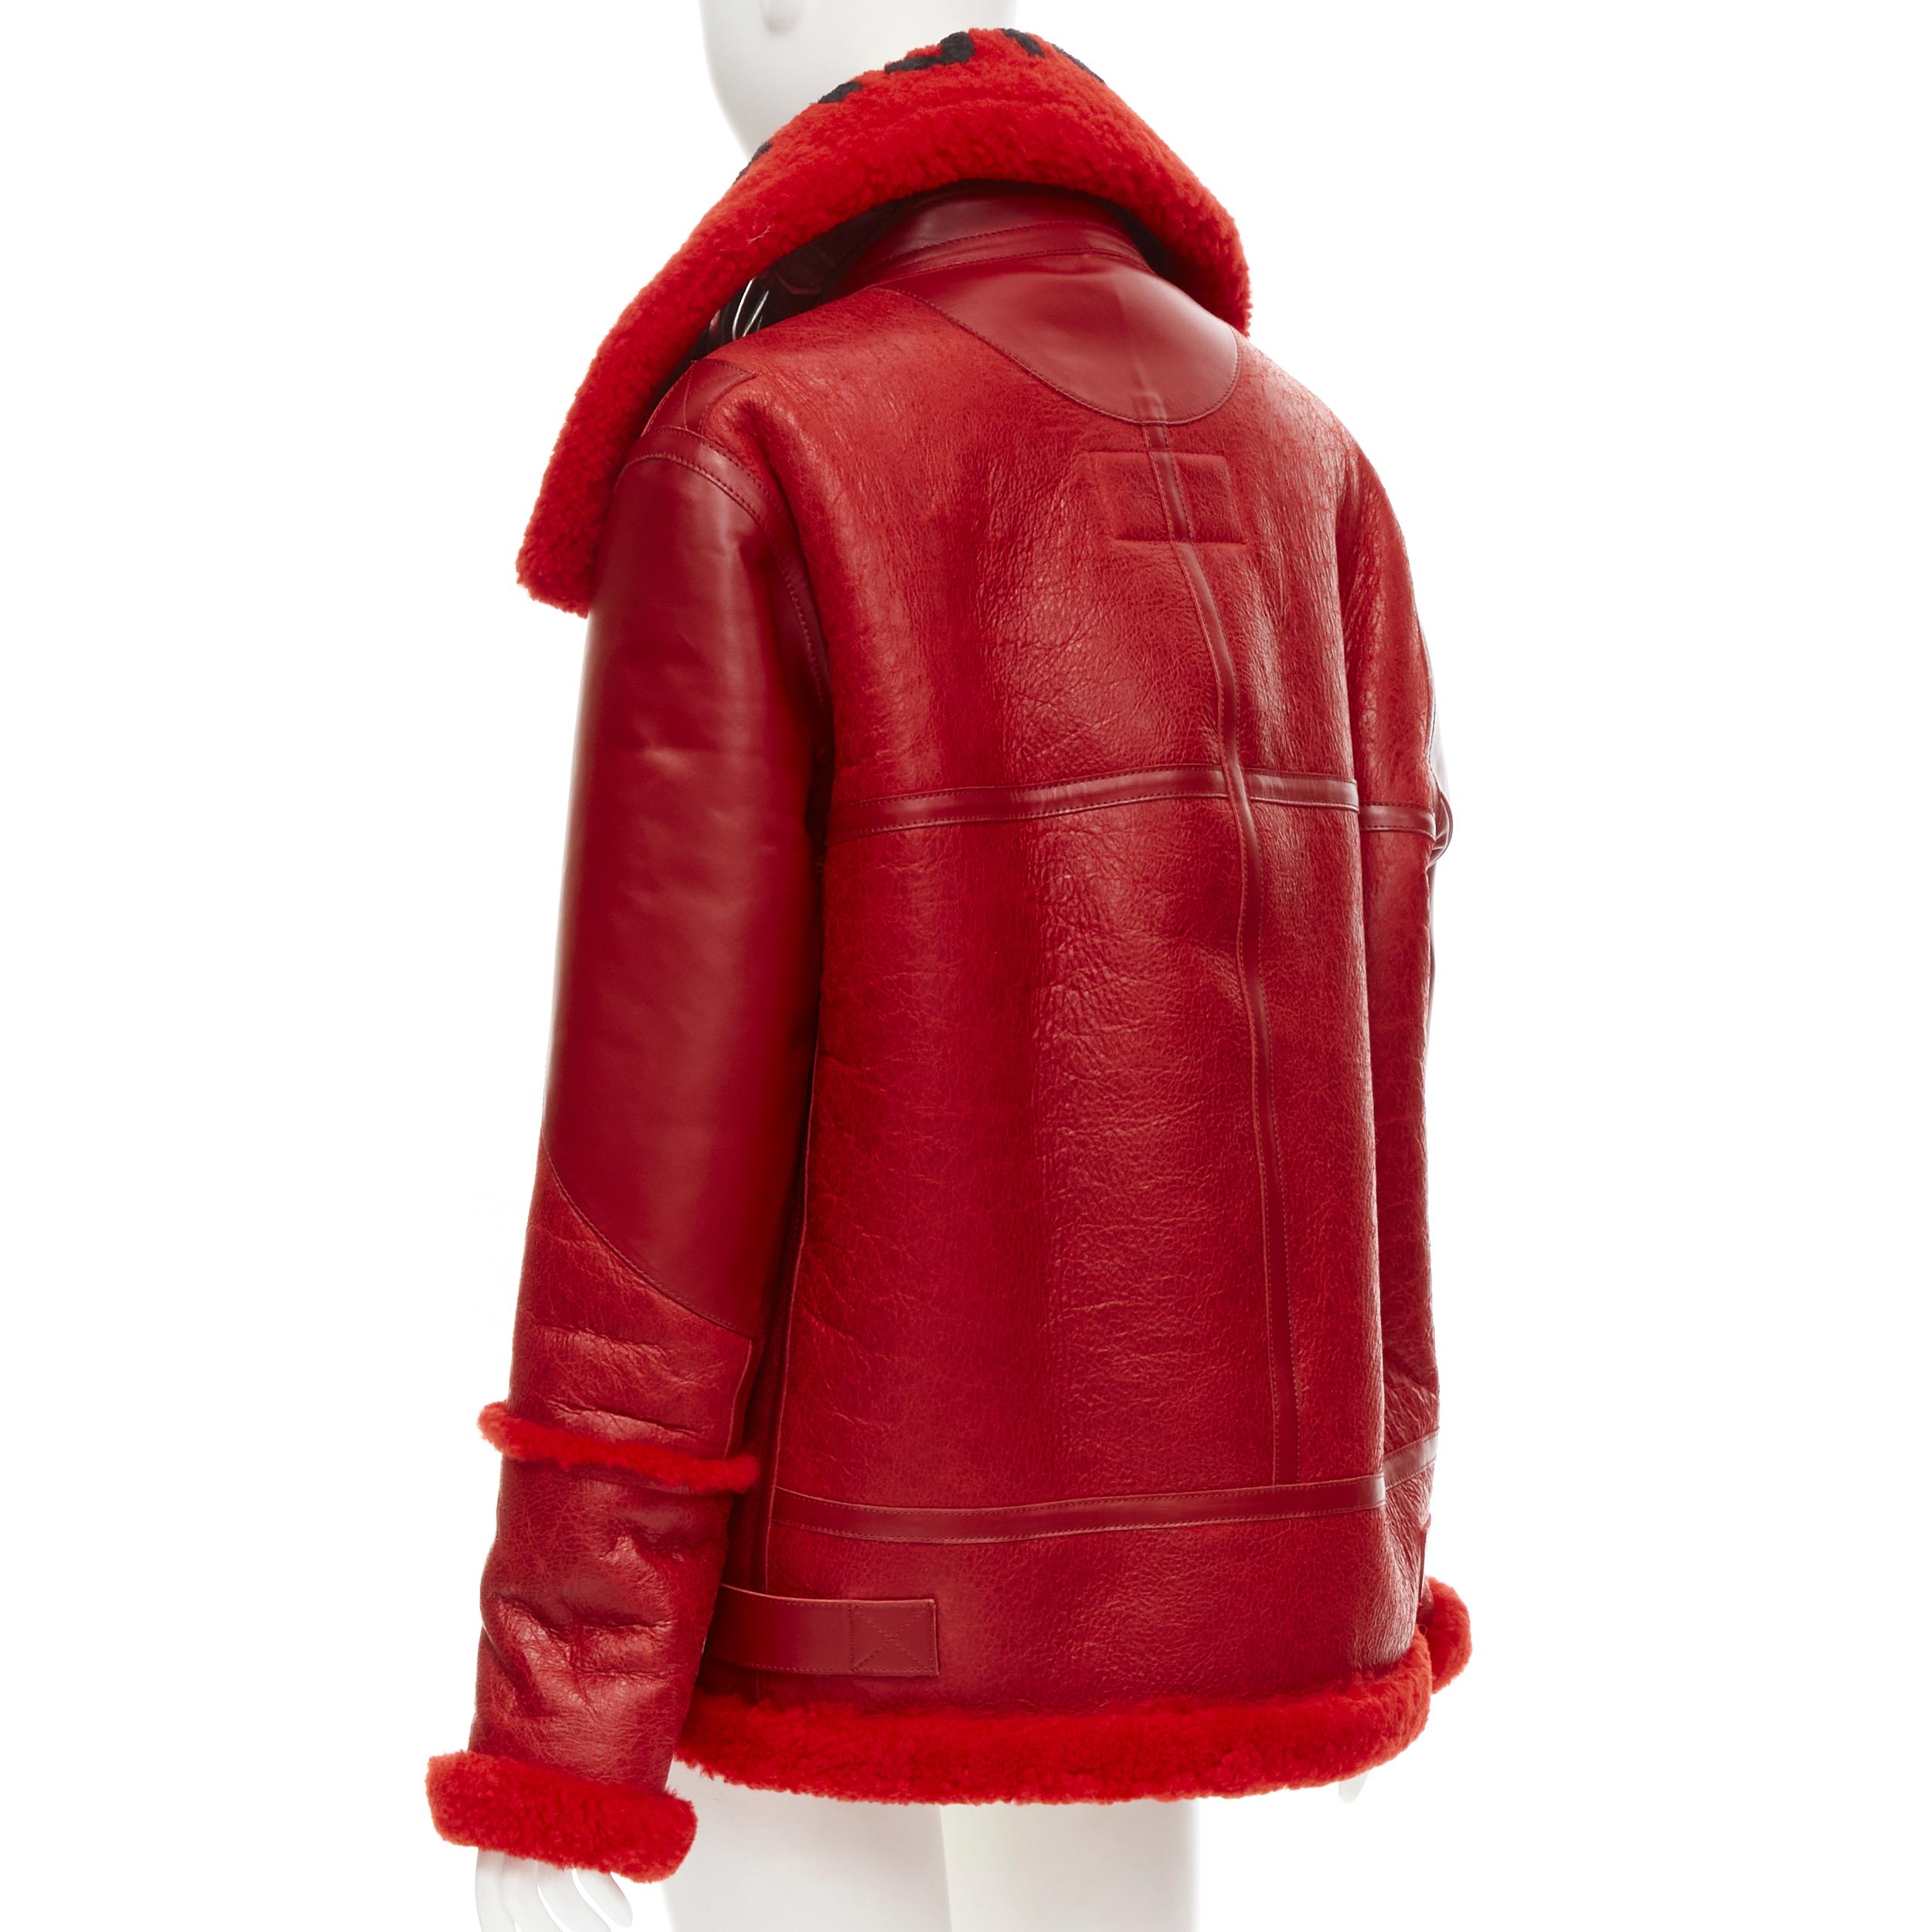 Red new BALENCIAGA Demna 2018 Runway Le Bombardier red leather shearling jacket M